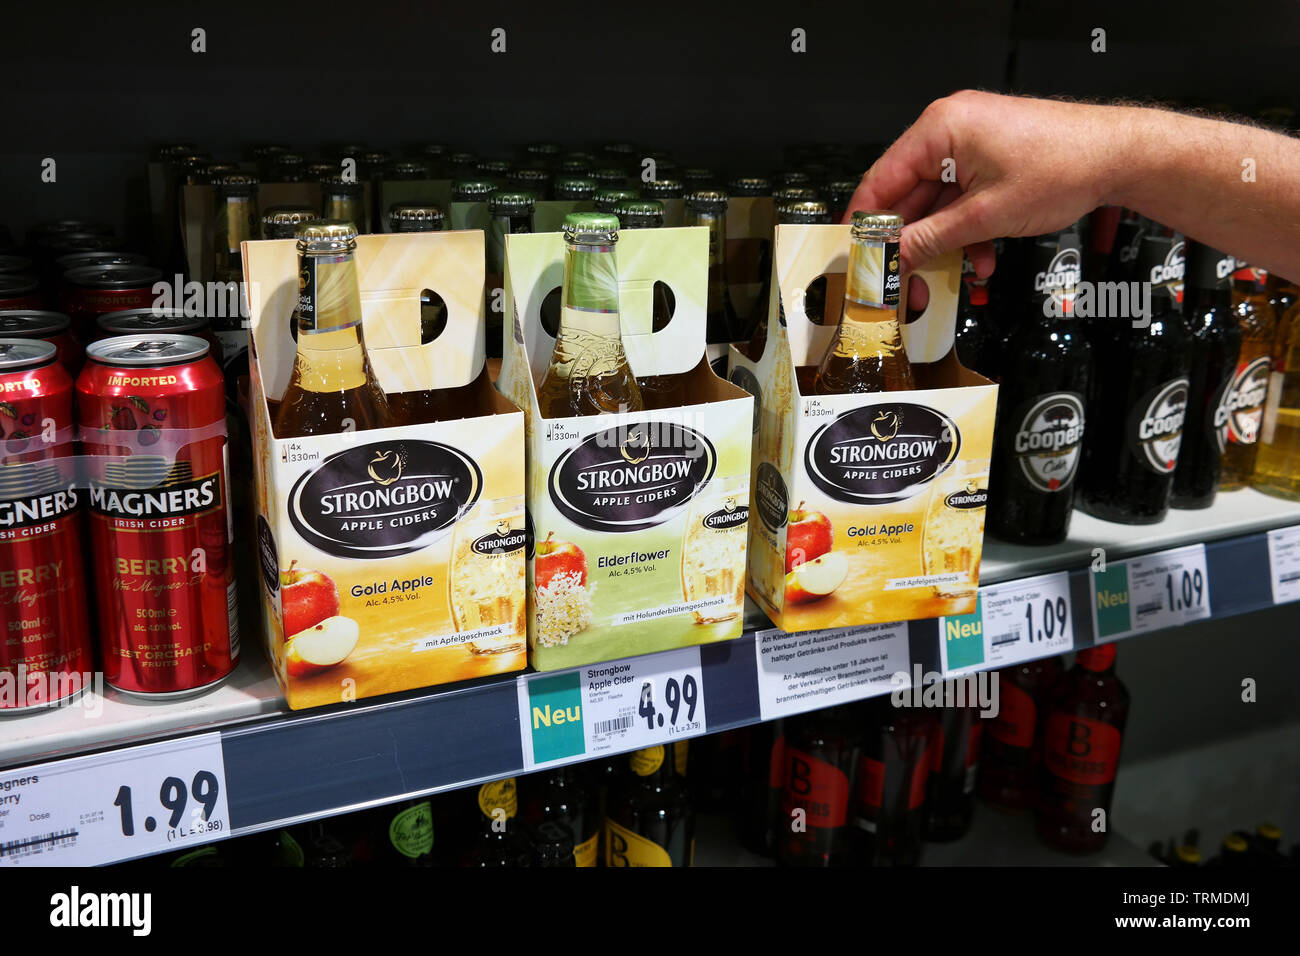 Strongbow apple ciders in a store Stock Photo - Alamy